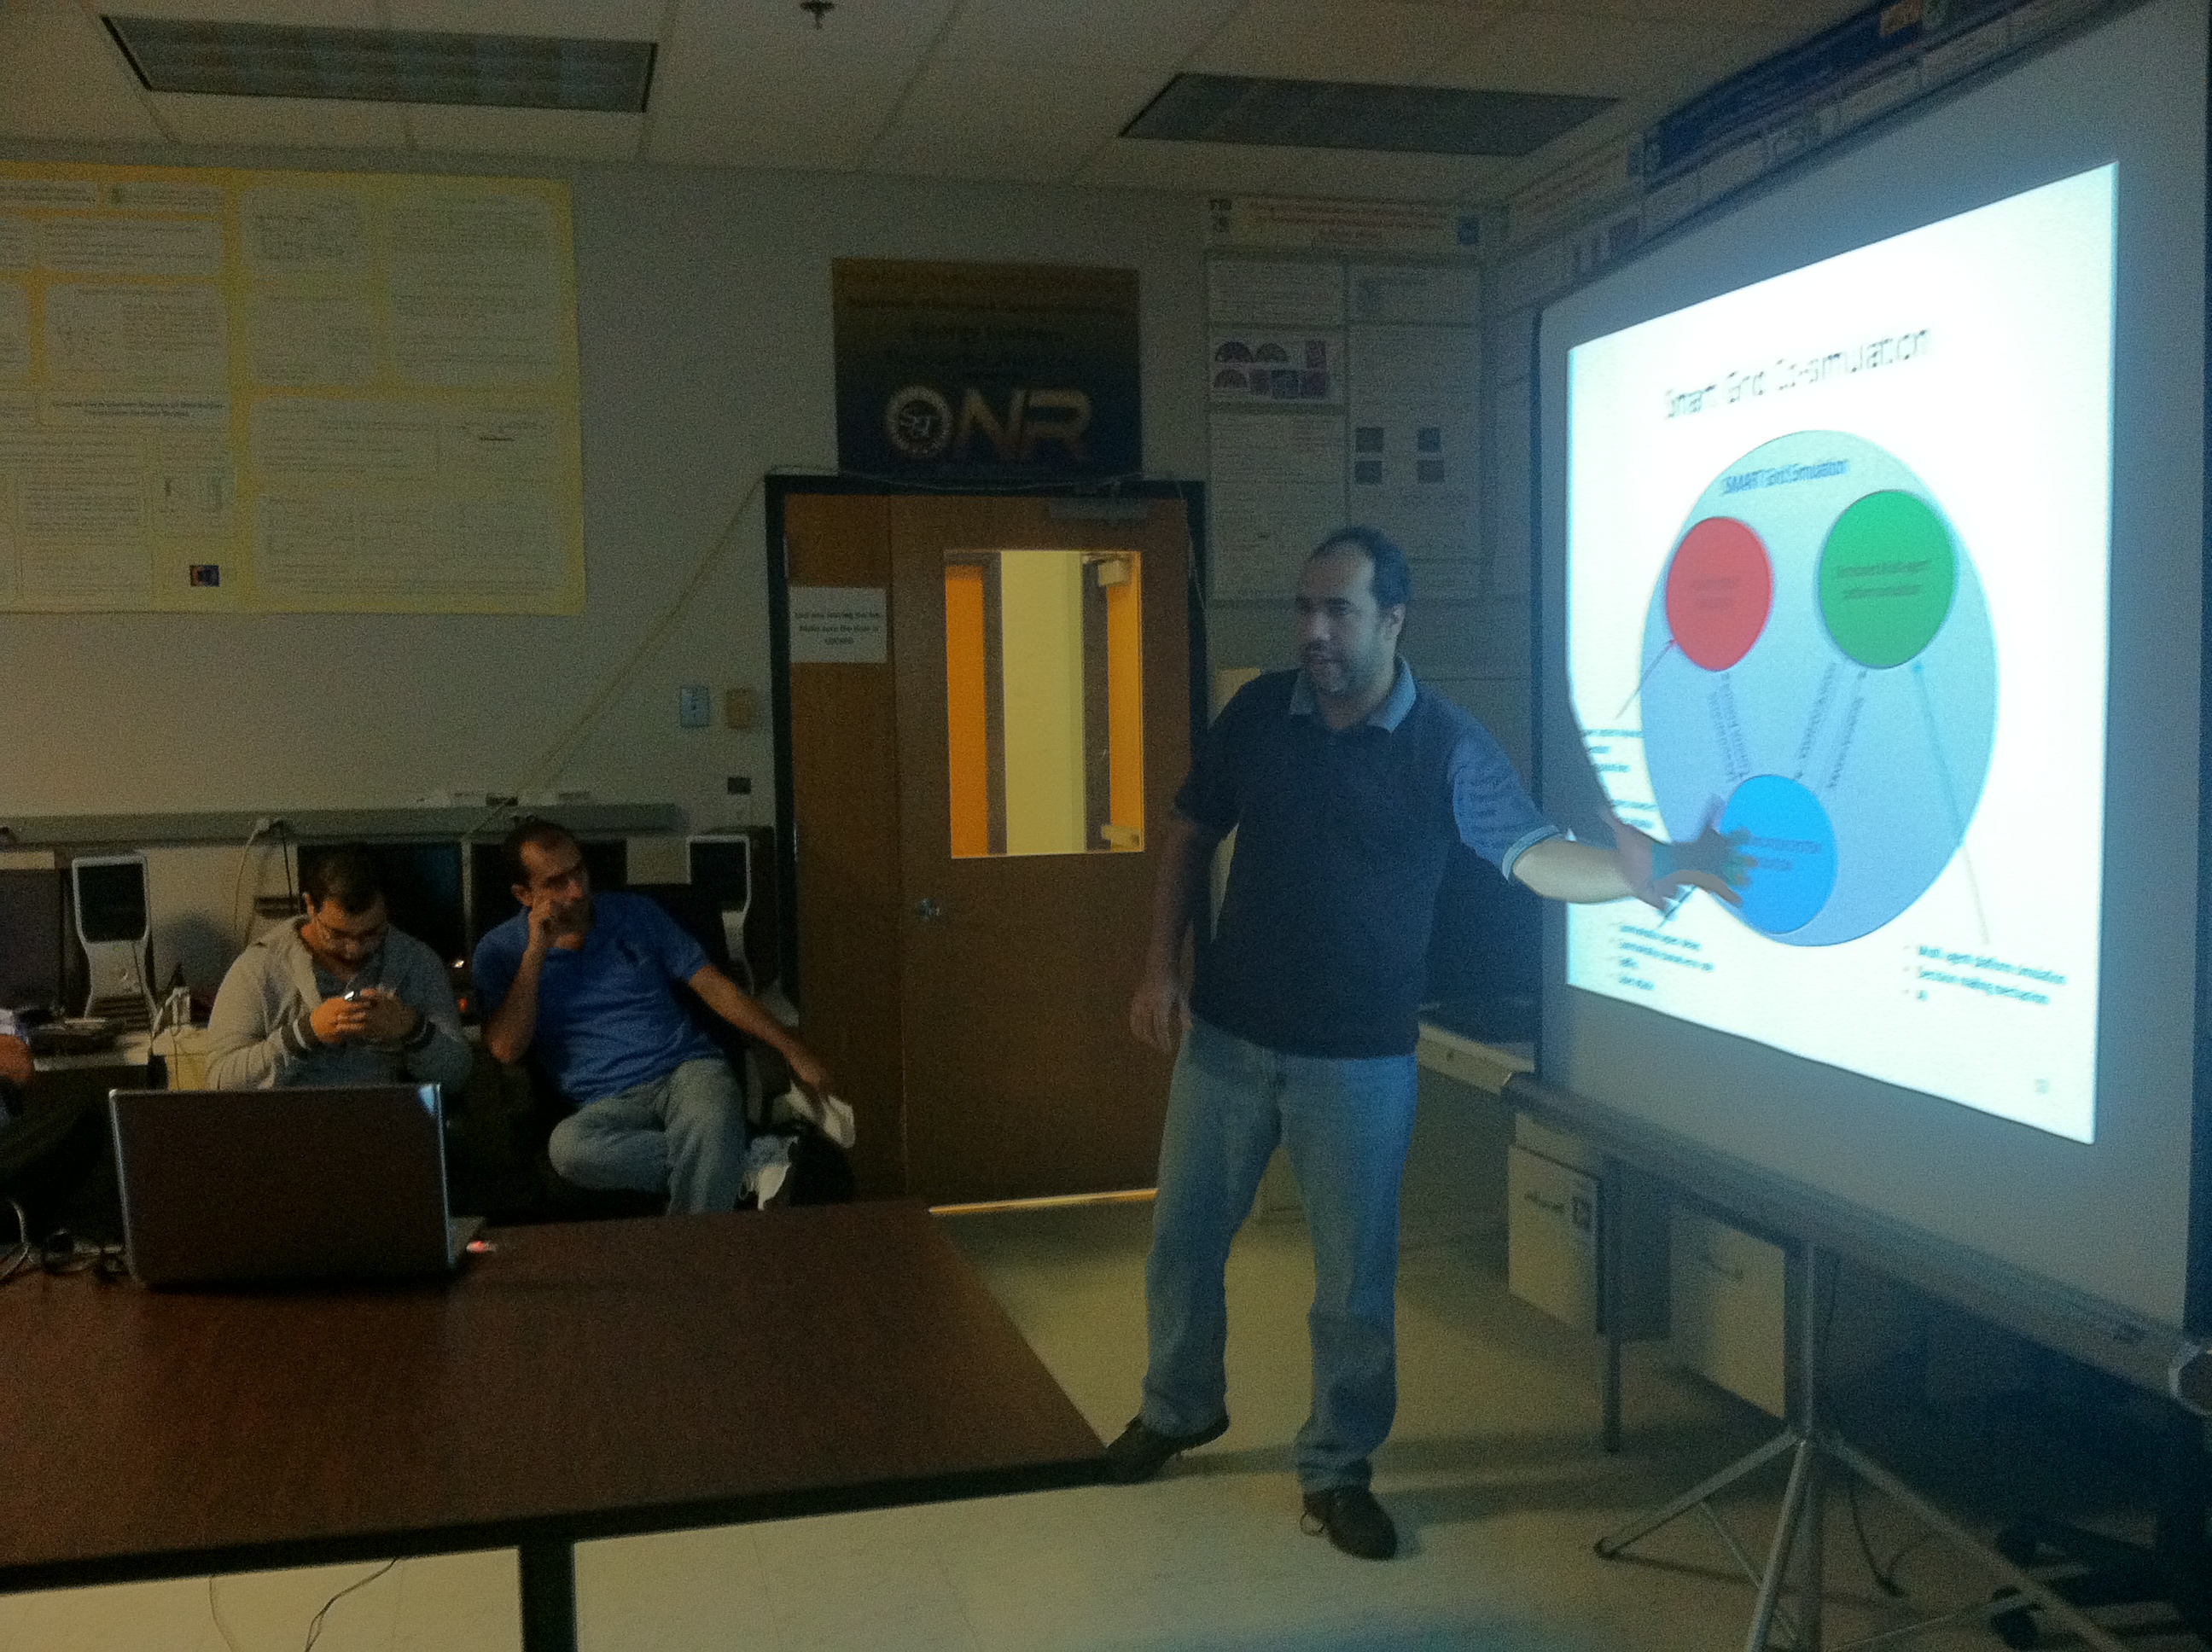 Weekly Research Presentations by Tarek Yousseff and Tan Ma